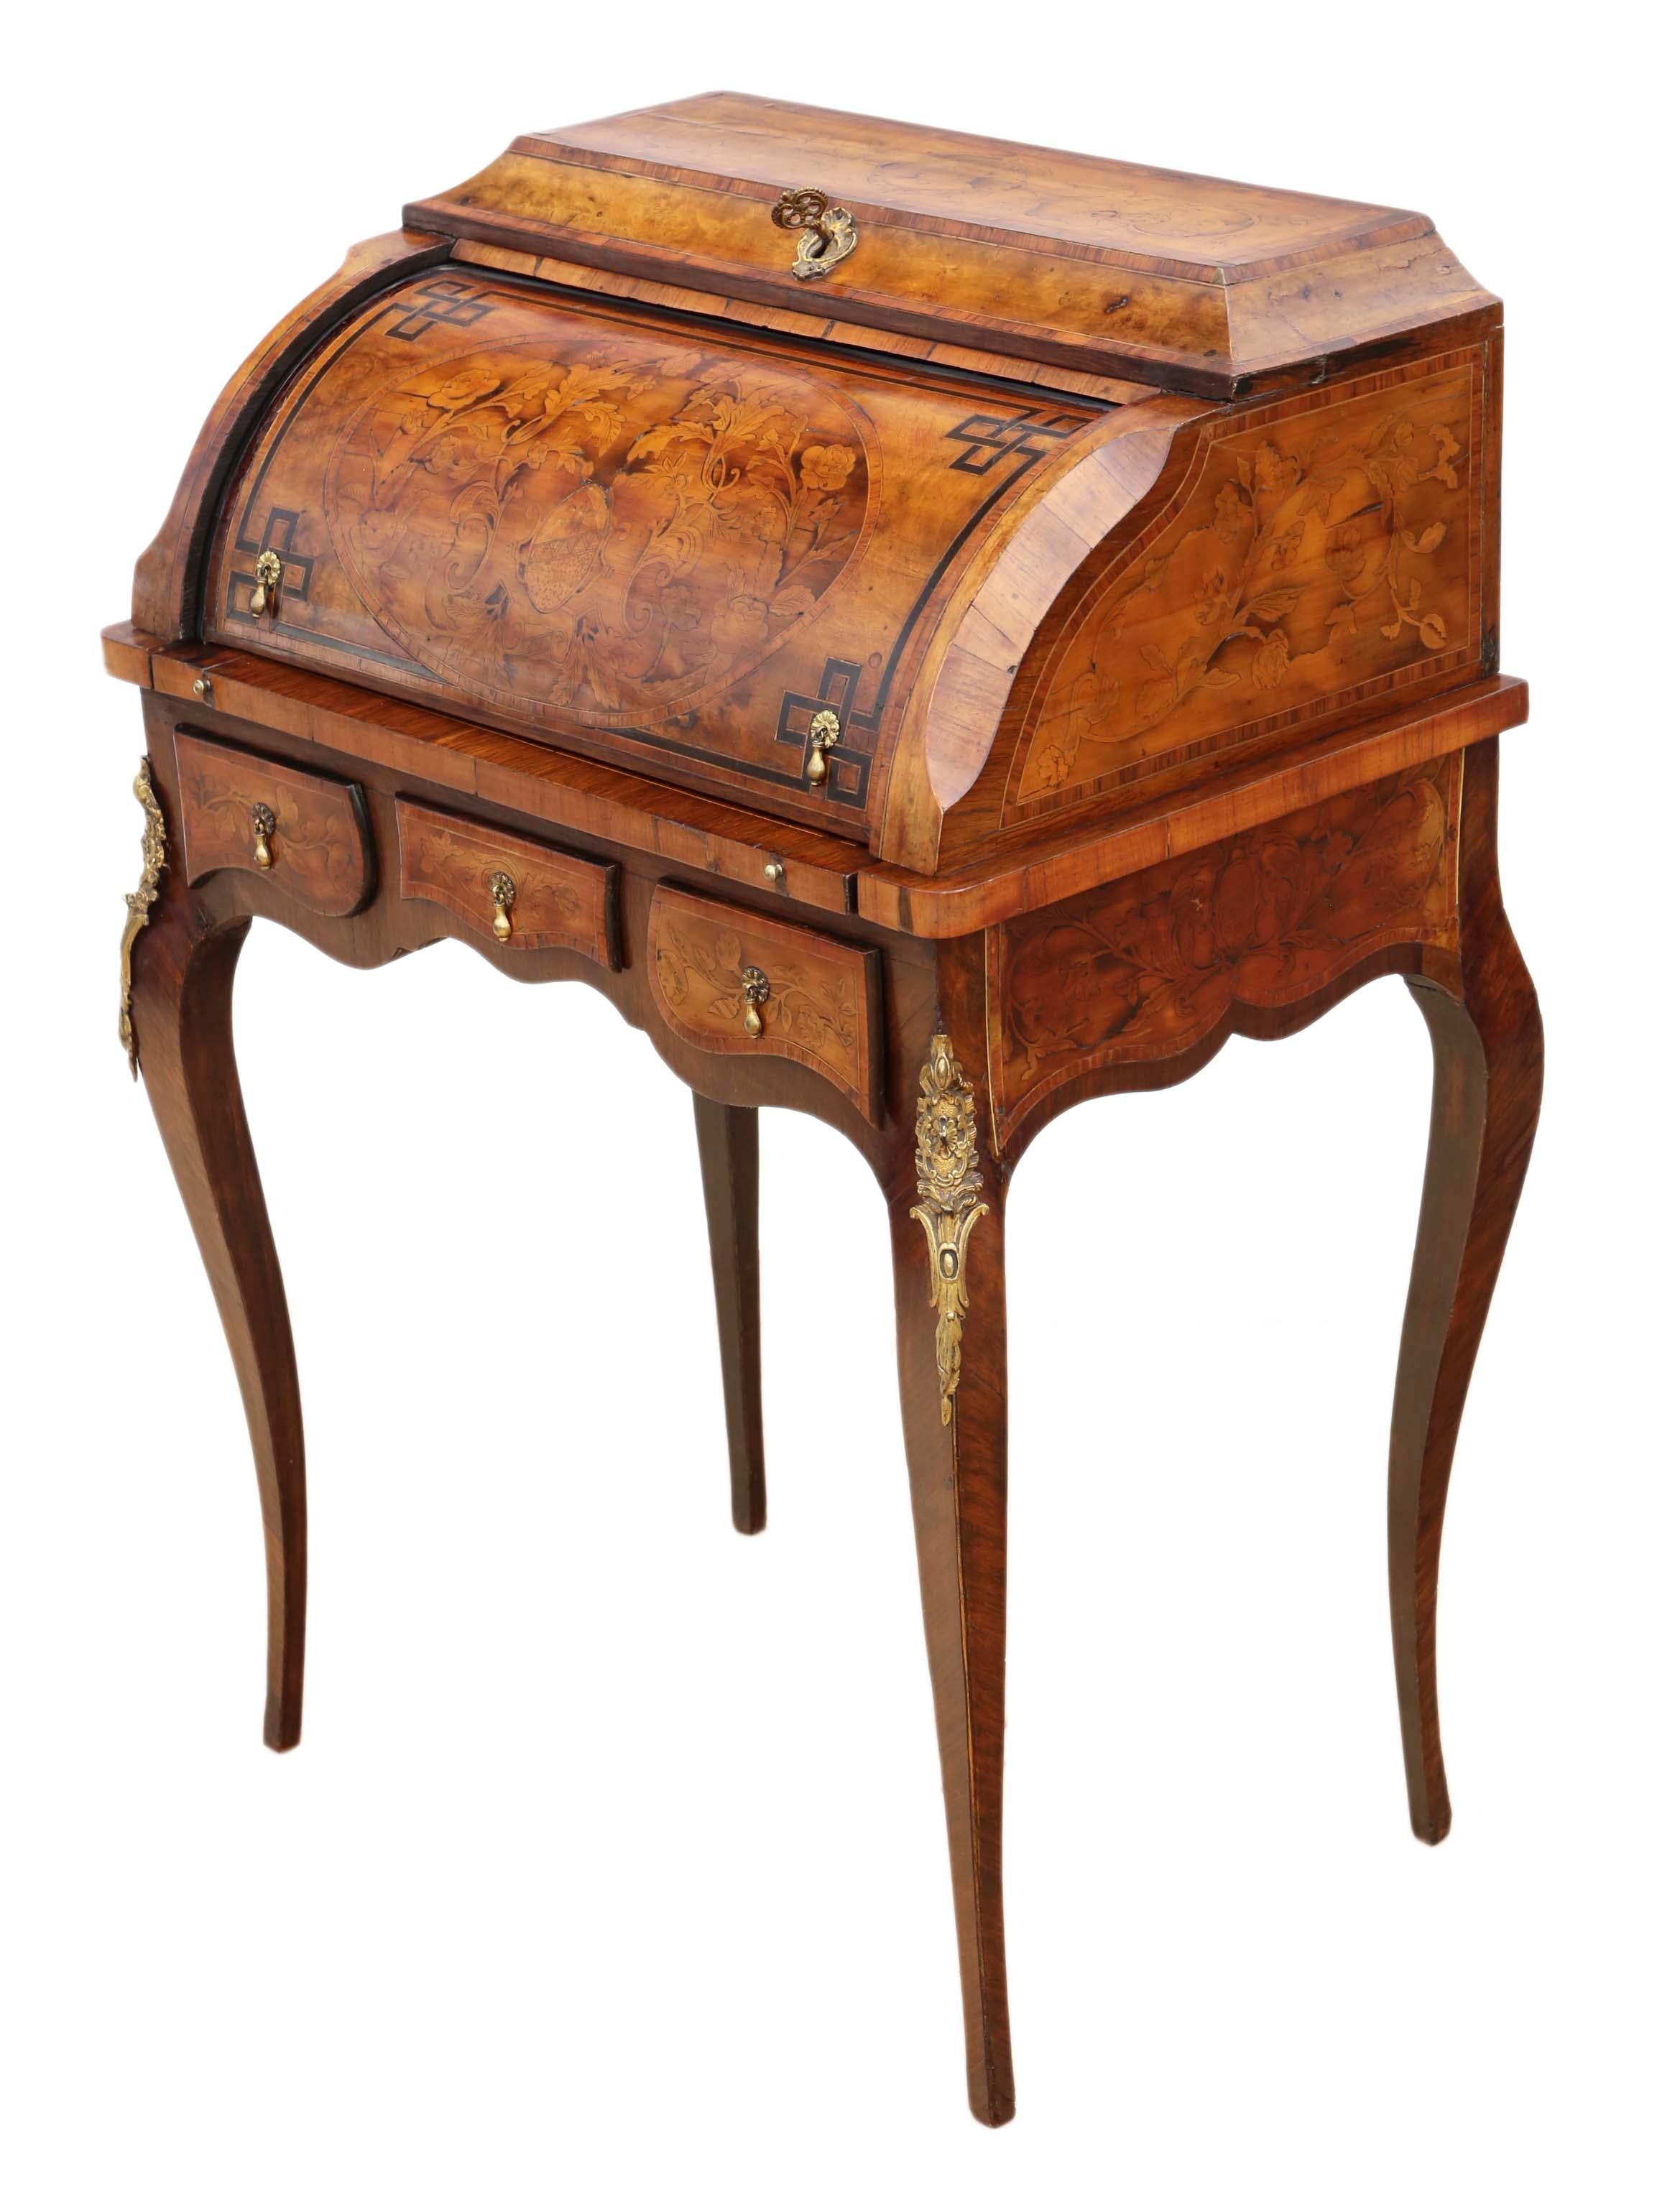 Antique quality small 19th century Marquetry cylinder bureau desk.
This is a rare breathtaking decorative piece of furniture, that is full of age, charm and character. Fantastic Marquetry veneers.
No loose joints and the oak lined drawers slide